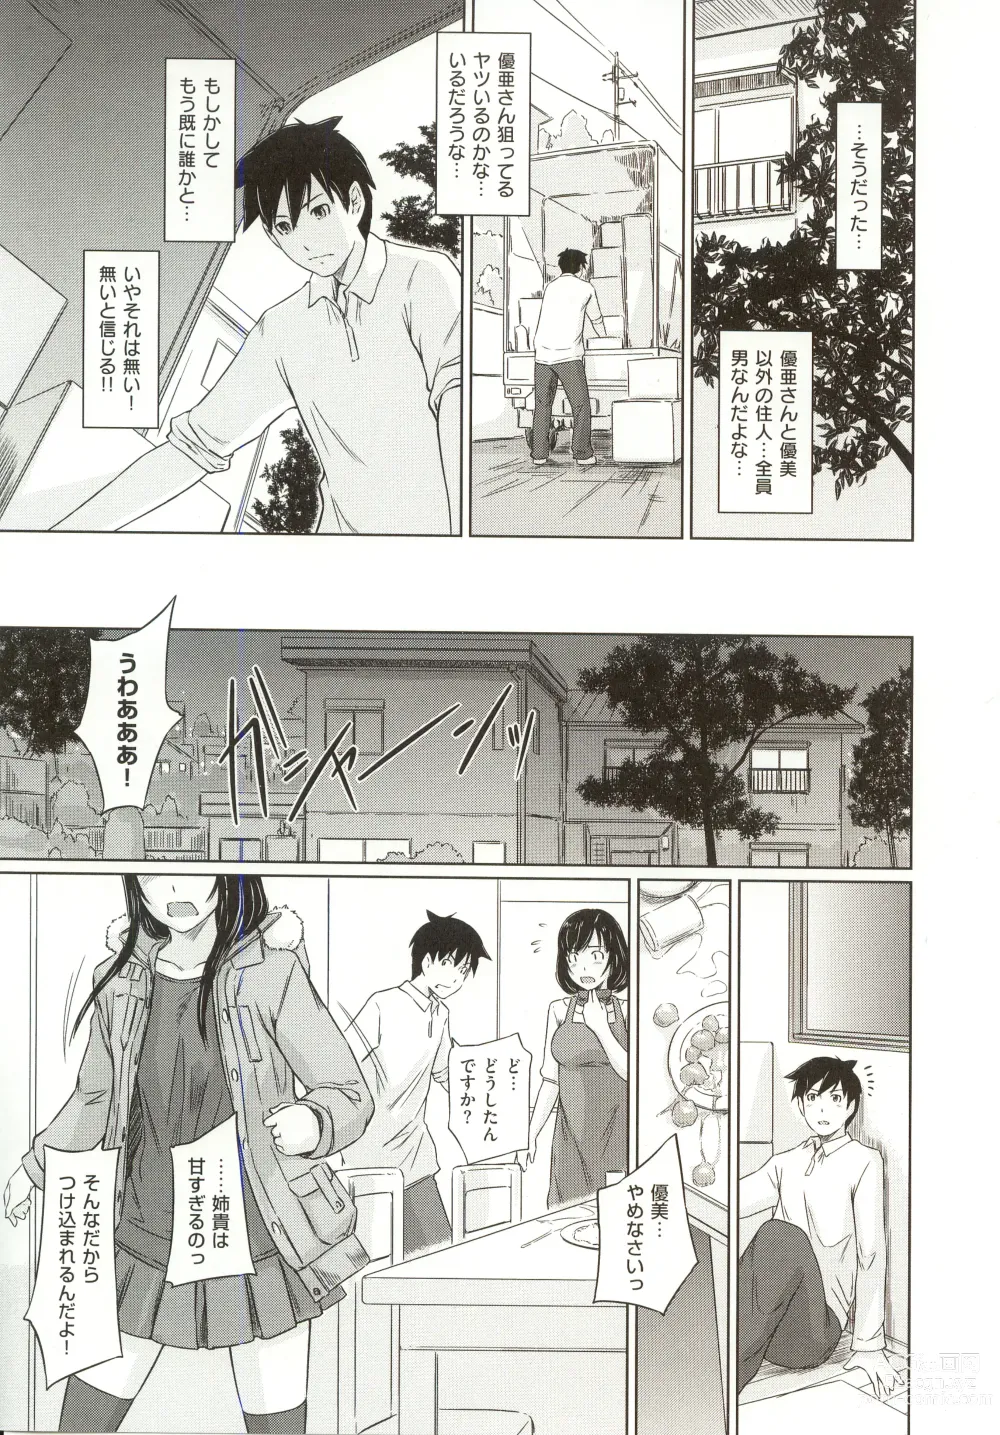 Page 14 of manga Tokoharusou e Youkoso - Welcome to the apartment of everlasting spring... come to me.